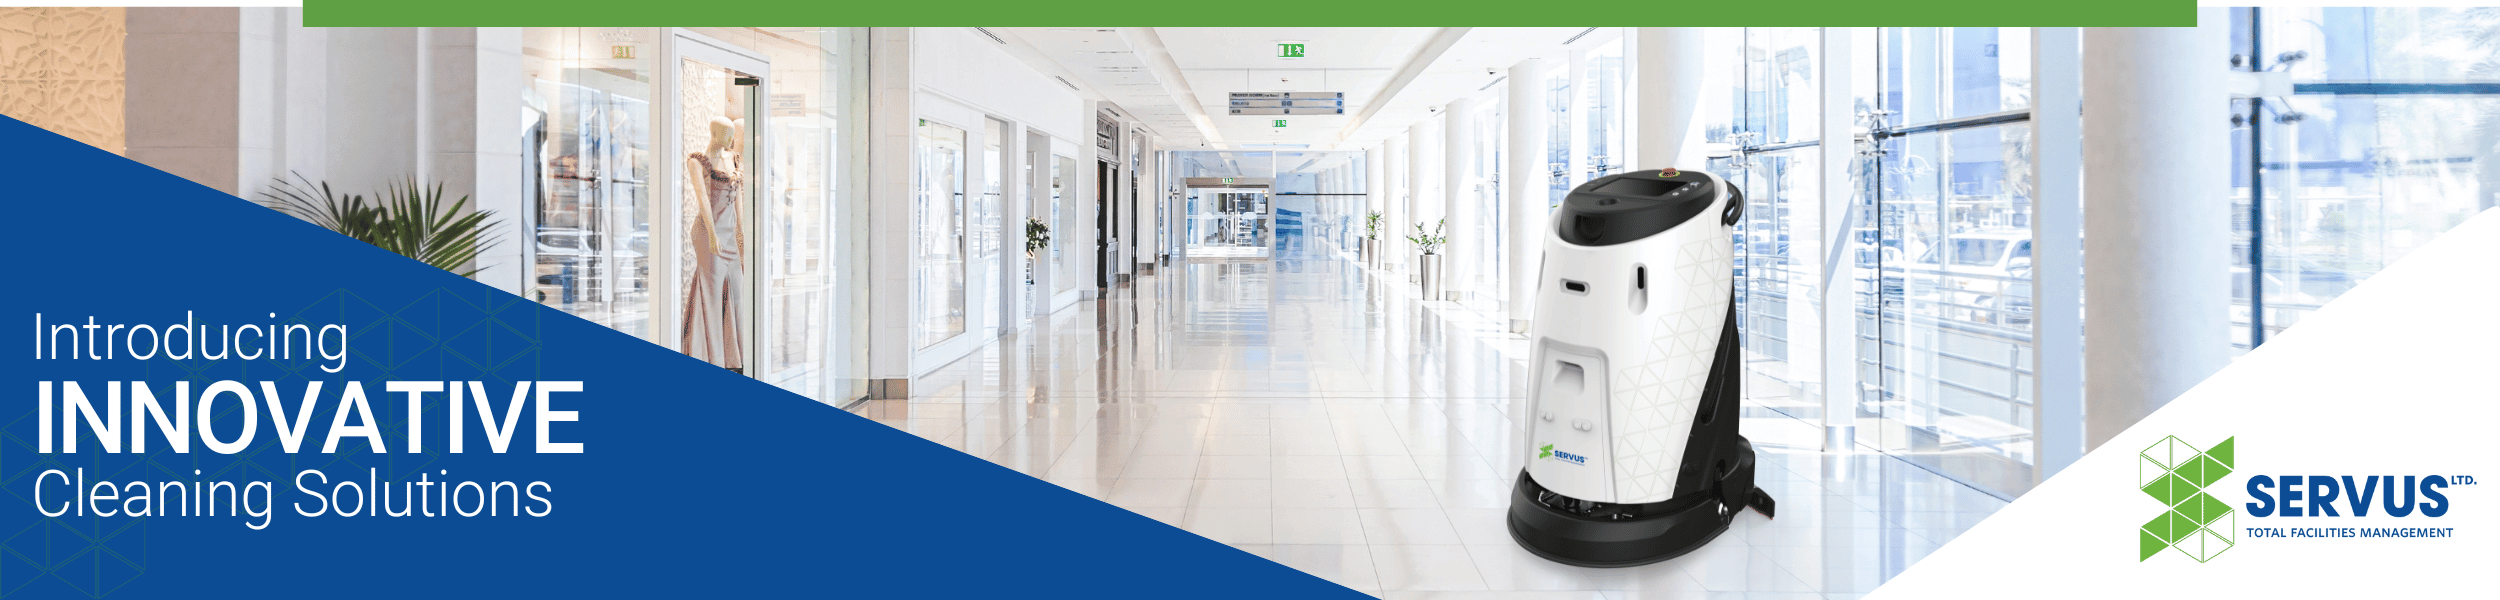 Image of Servus's Autonomous Cleaning Robot showcasing advanced cleaning technology in a modern workspace, symbolizing the future of cleanliness and increased productivity.